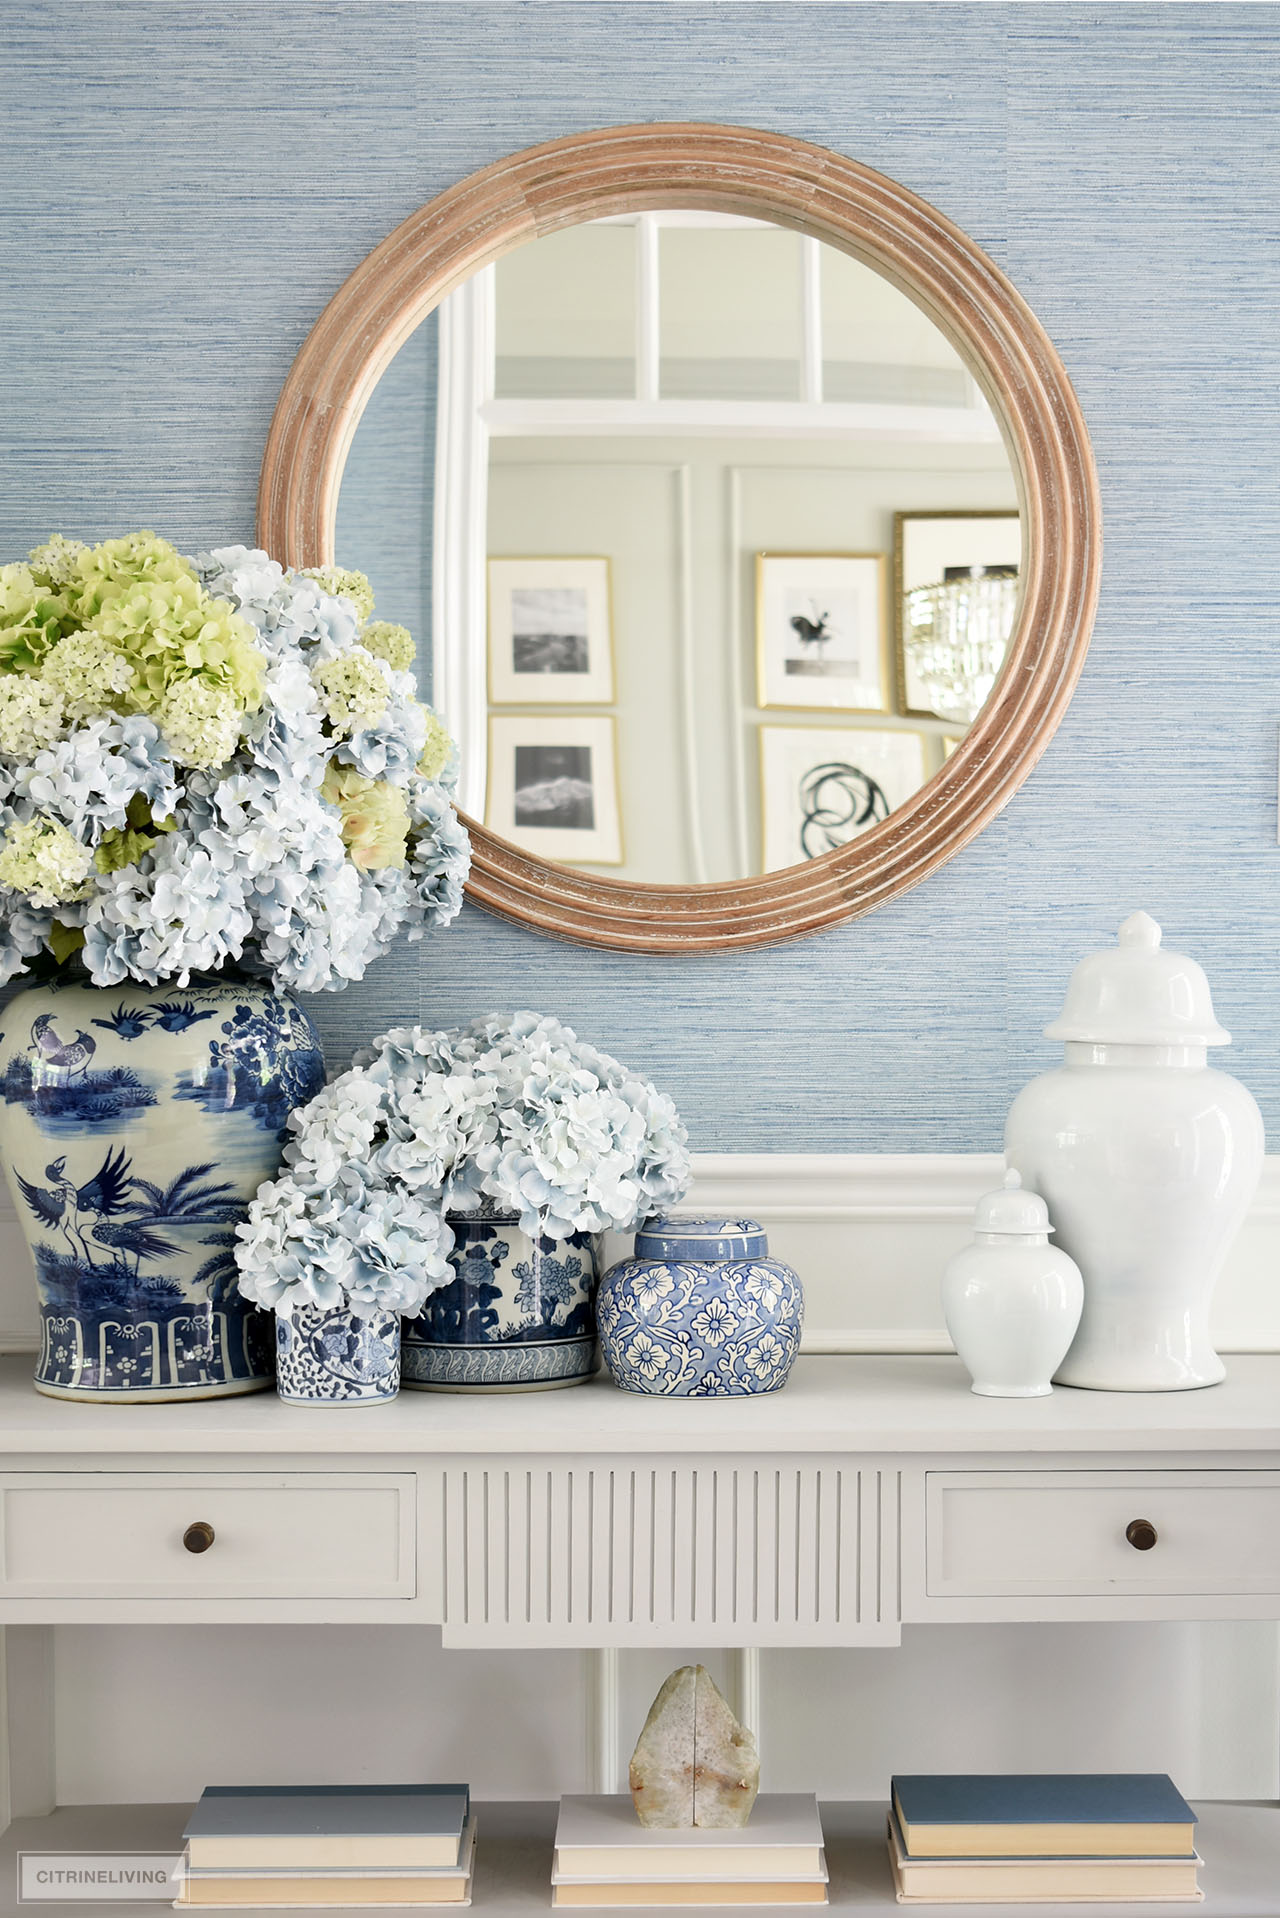 A beautifully styled entryway for summer with blue and white ginger jars and vases arranged with blue and green hydrangeas.